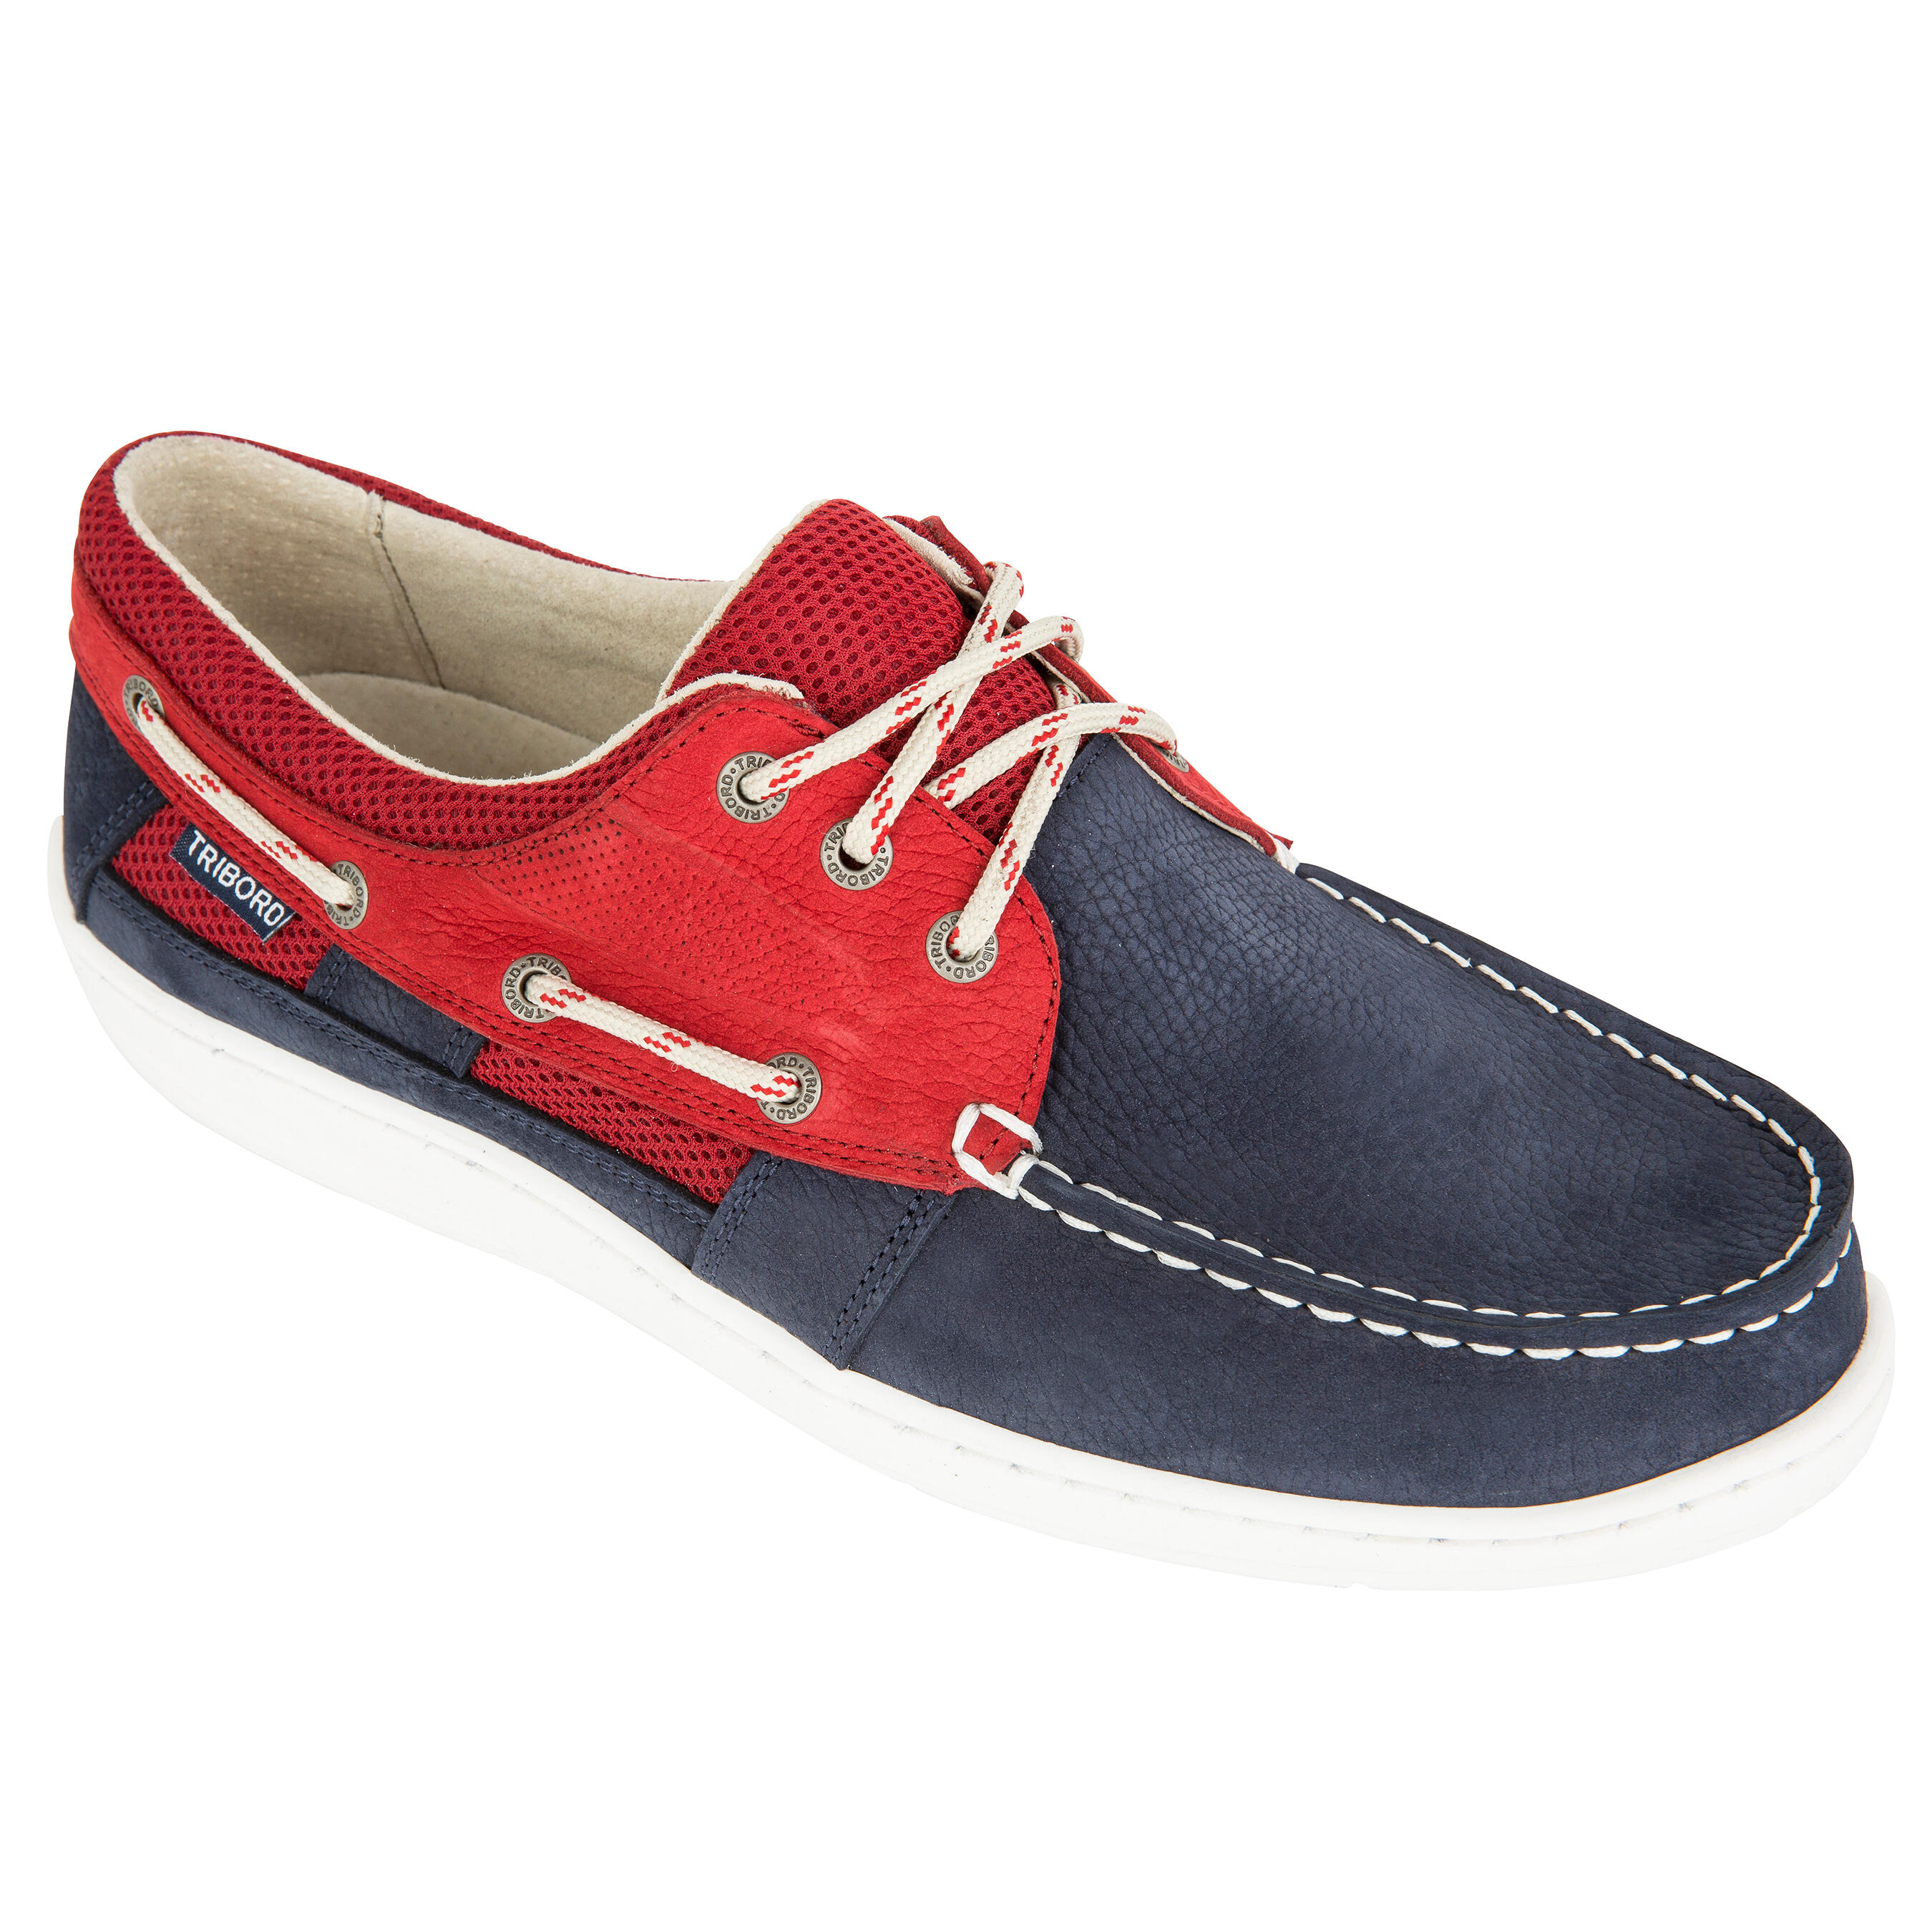 TRIBORD Clipper Men's Leather Boat Shoes - Blue/Red